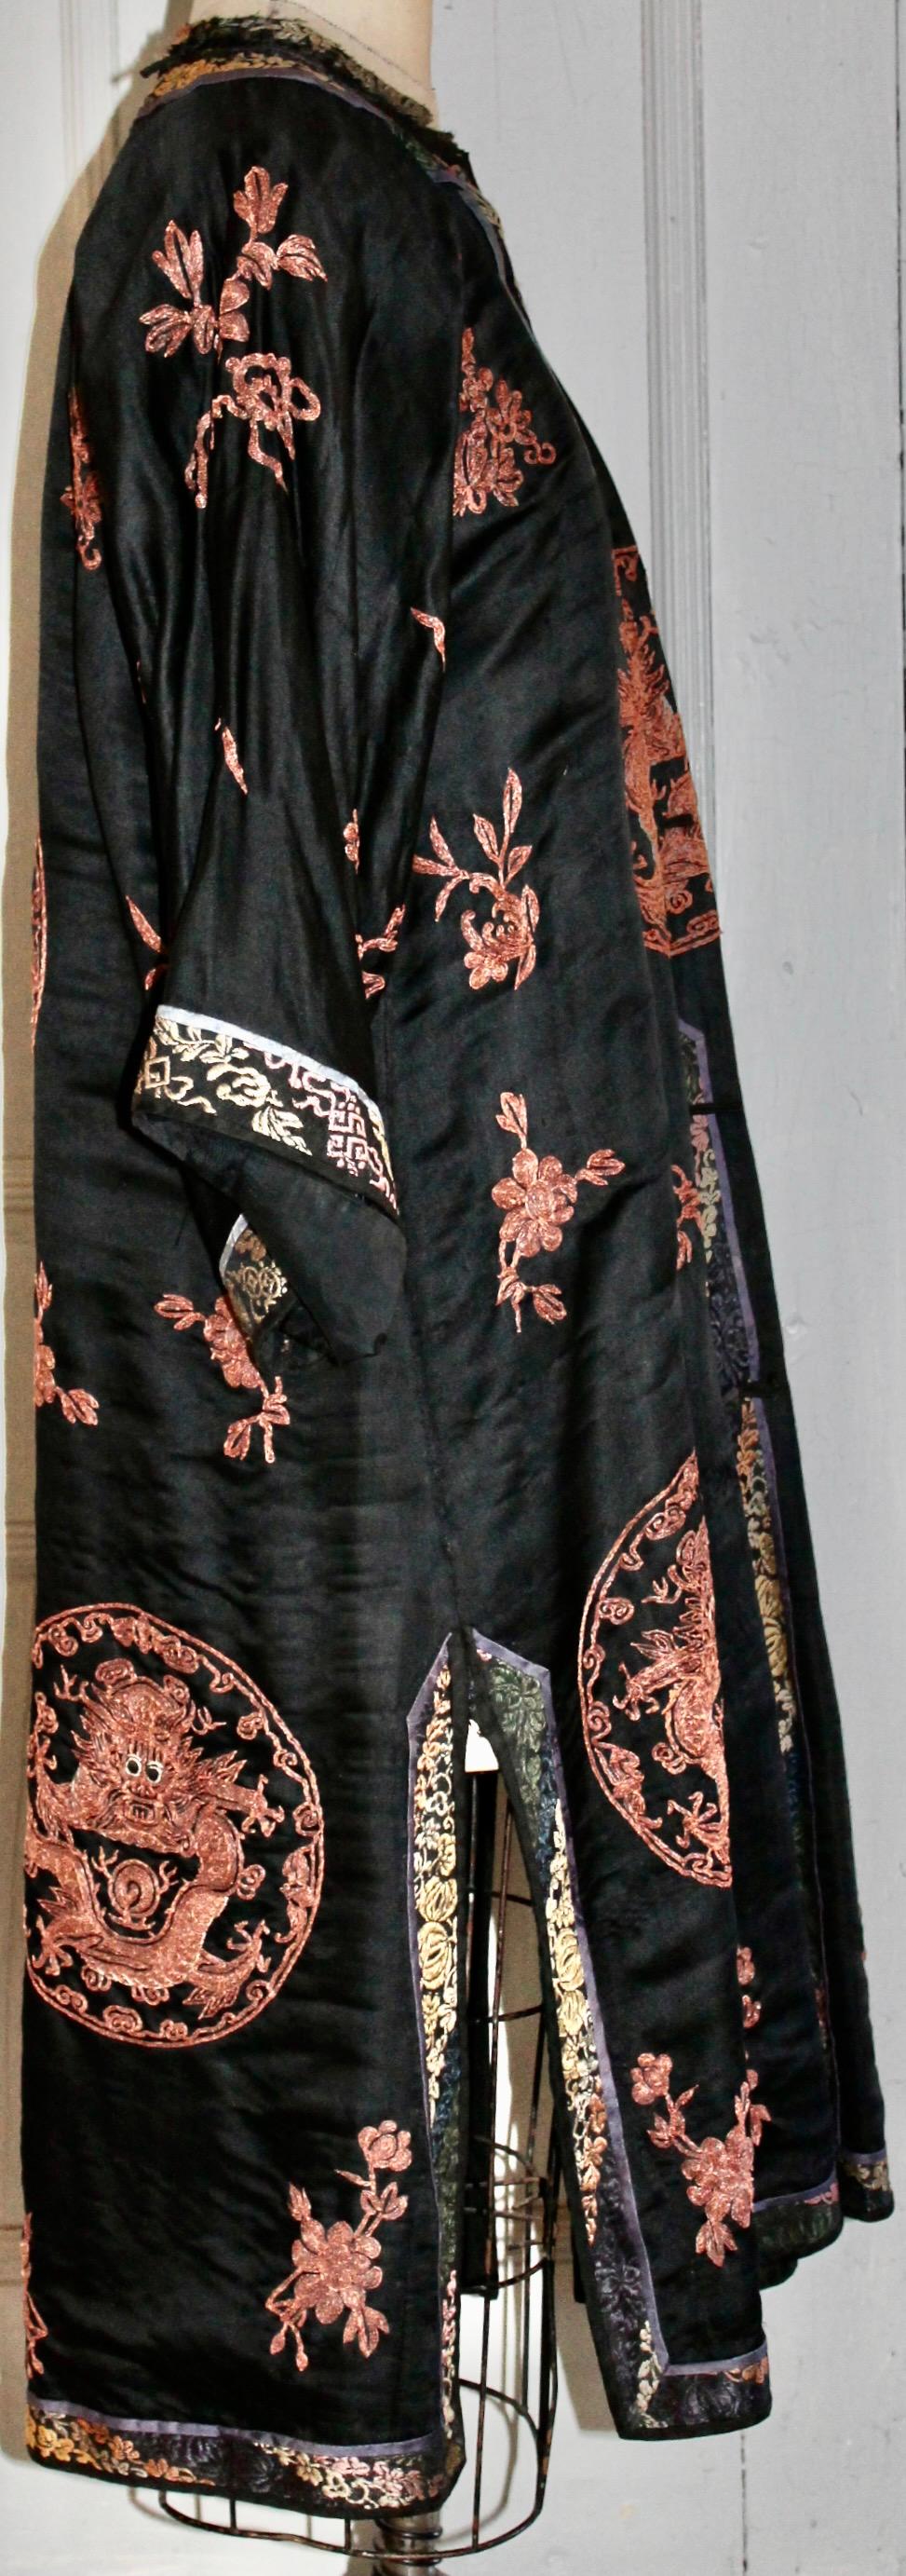 Black Early 20th Century Chinese Robe with Metallic Dragon Embroidery For Sale